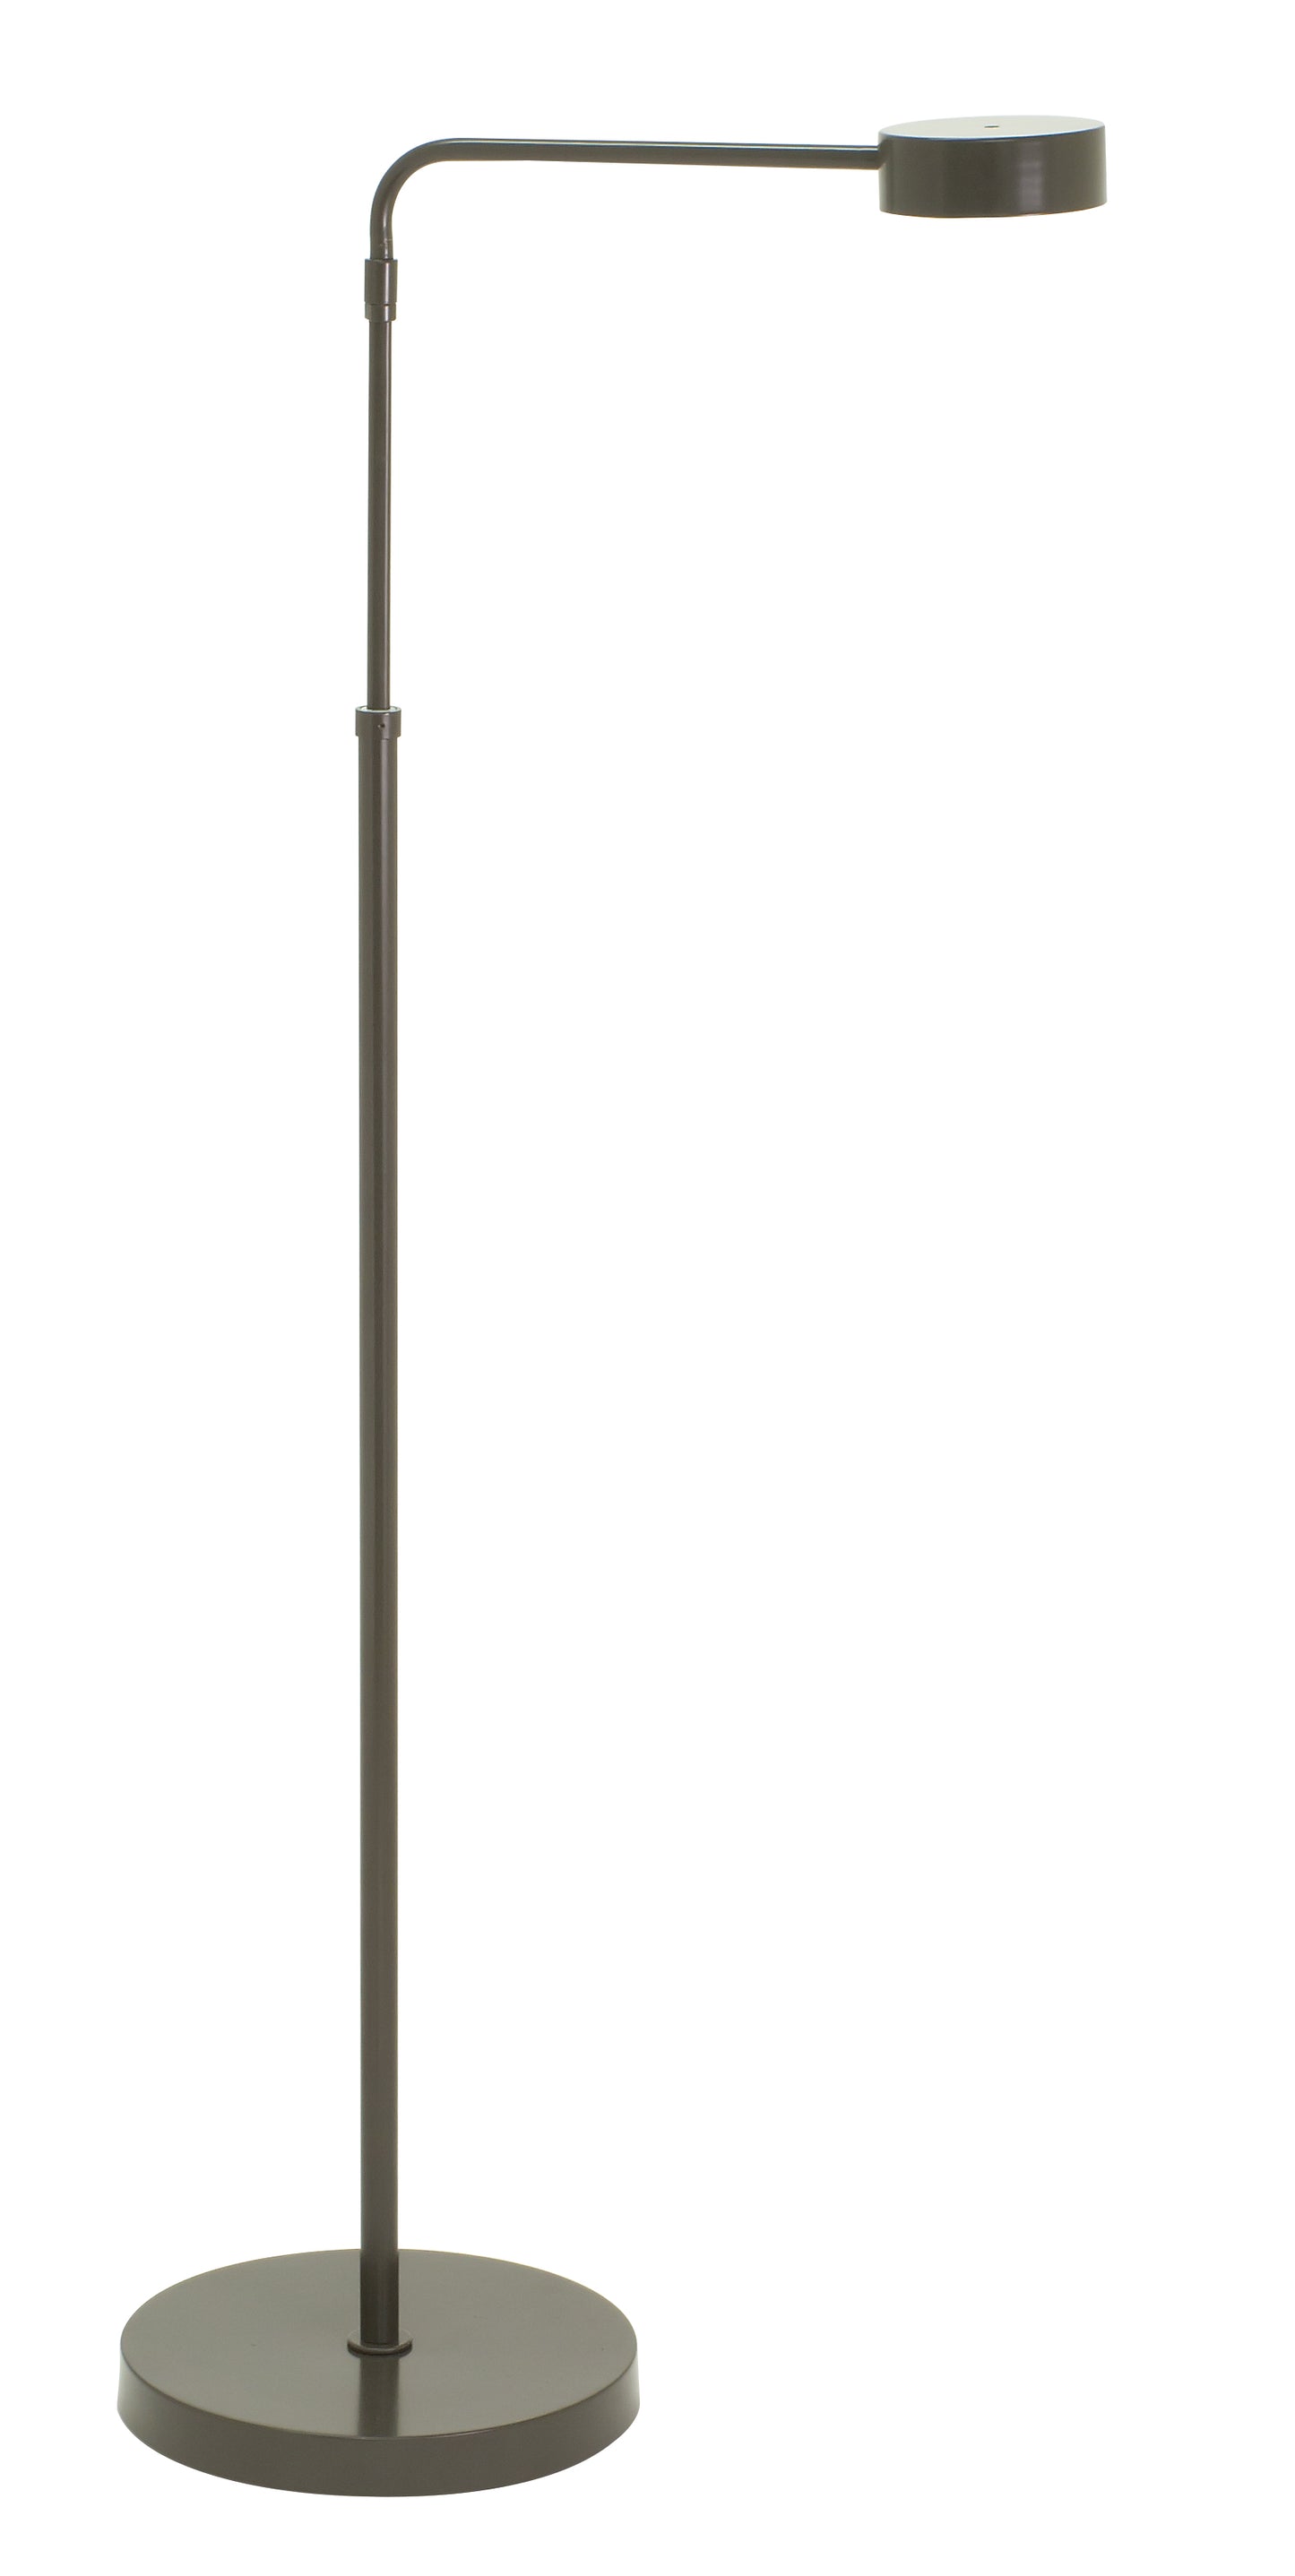 House of Troy Generation Adjustable LED Floor Lamp in Architectural Bronze G400-ABZ